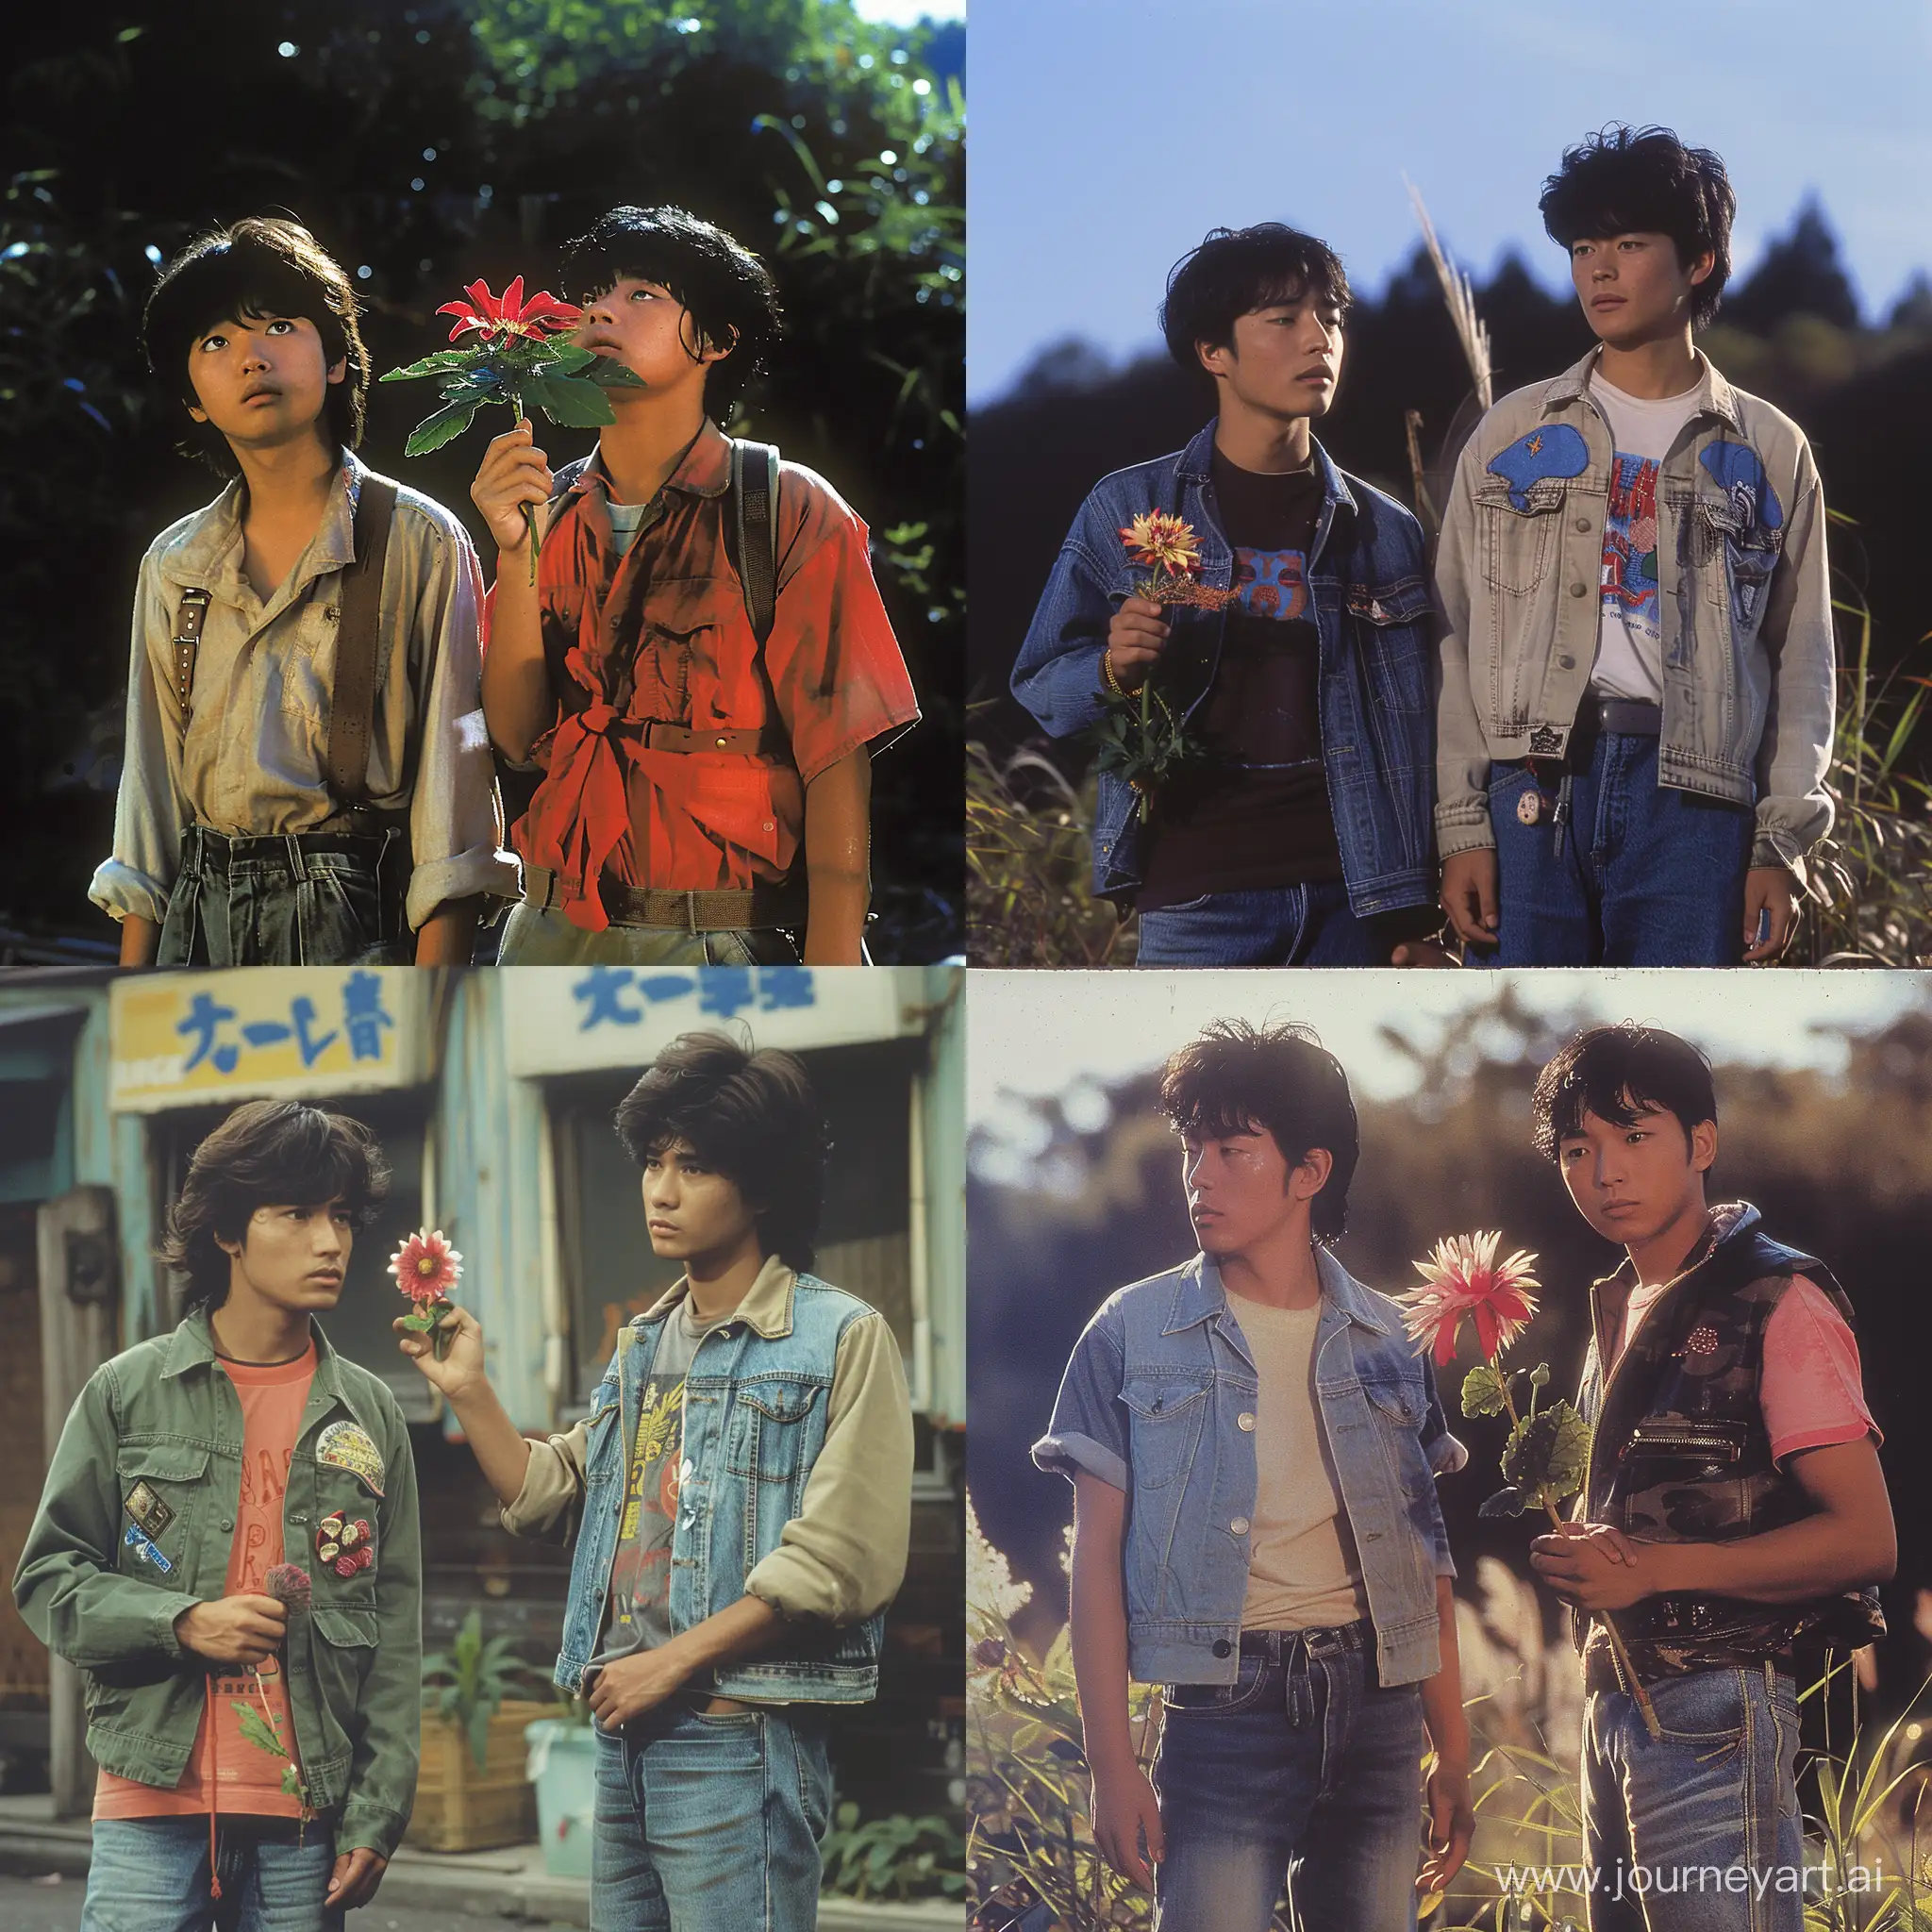 a live-action 80s movie scene, a yung guy holding a flower standing next another young man. Scene movie in 1980s. 80s ghibli movie, sceenshot photo from ghibli movie in 1980s
